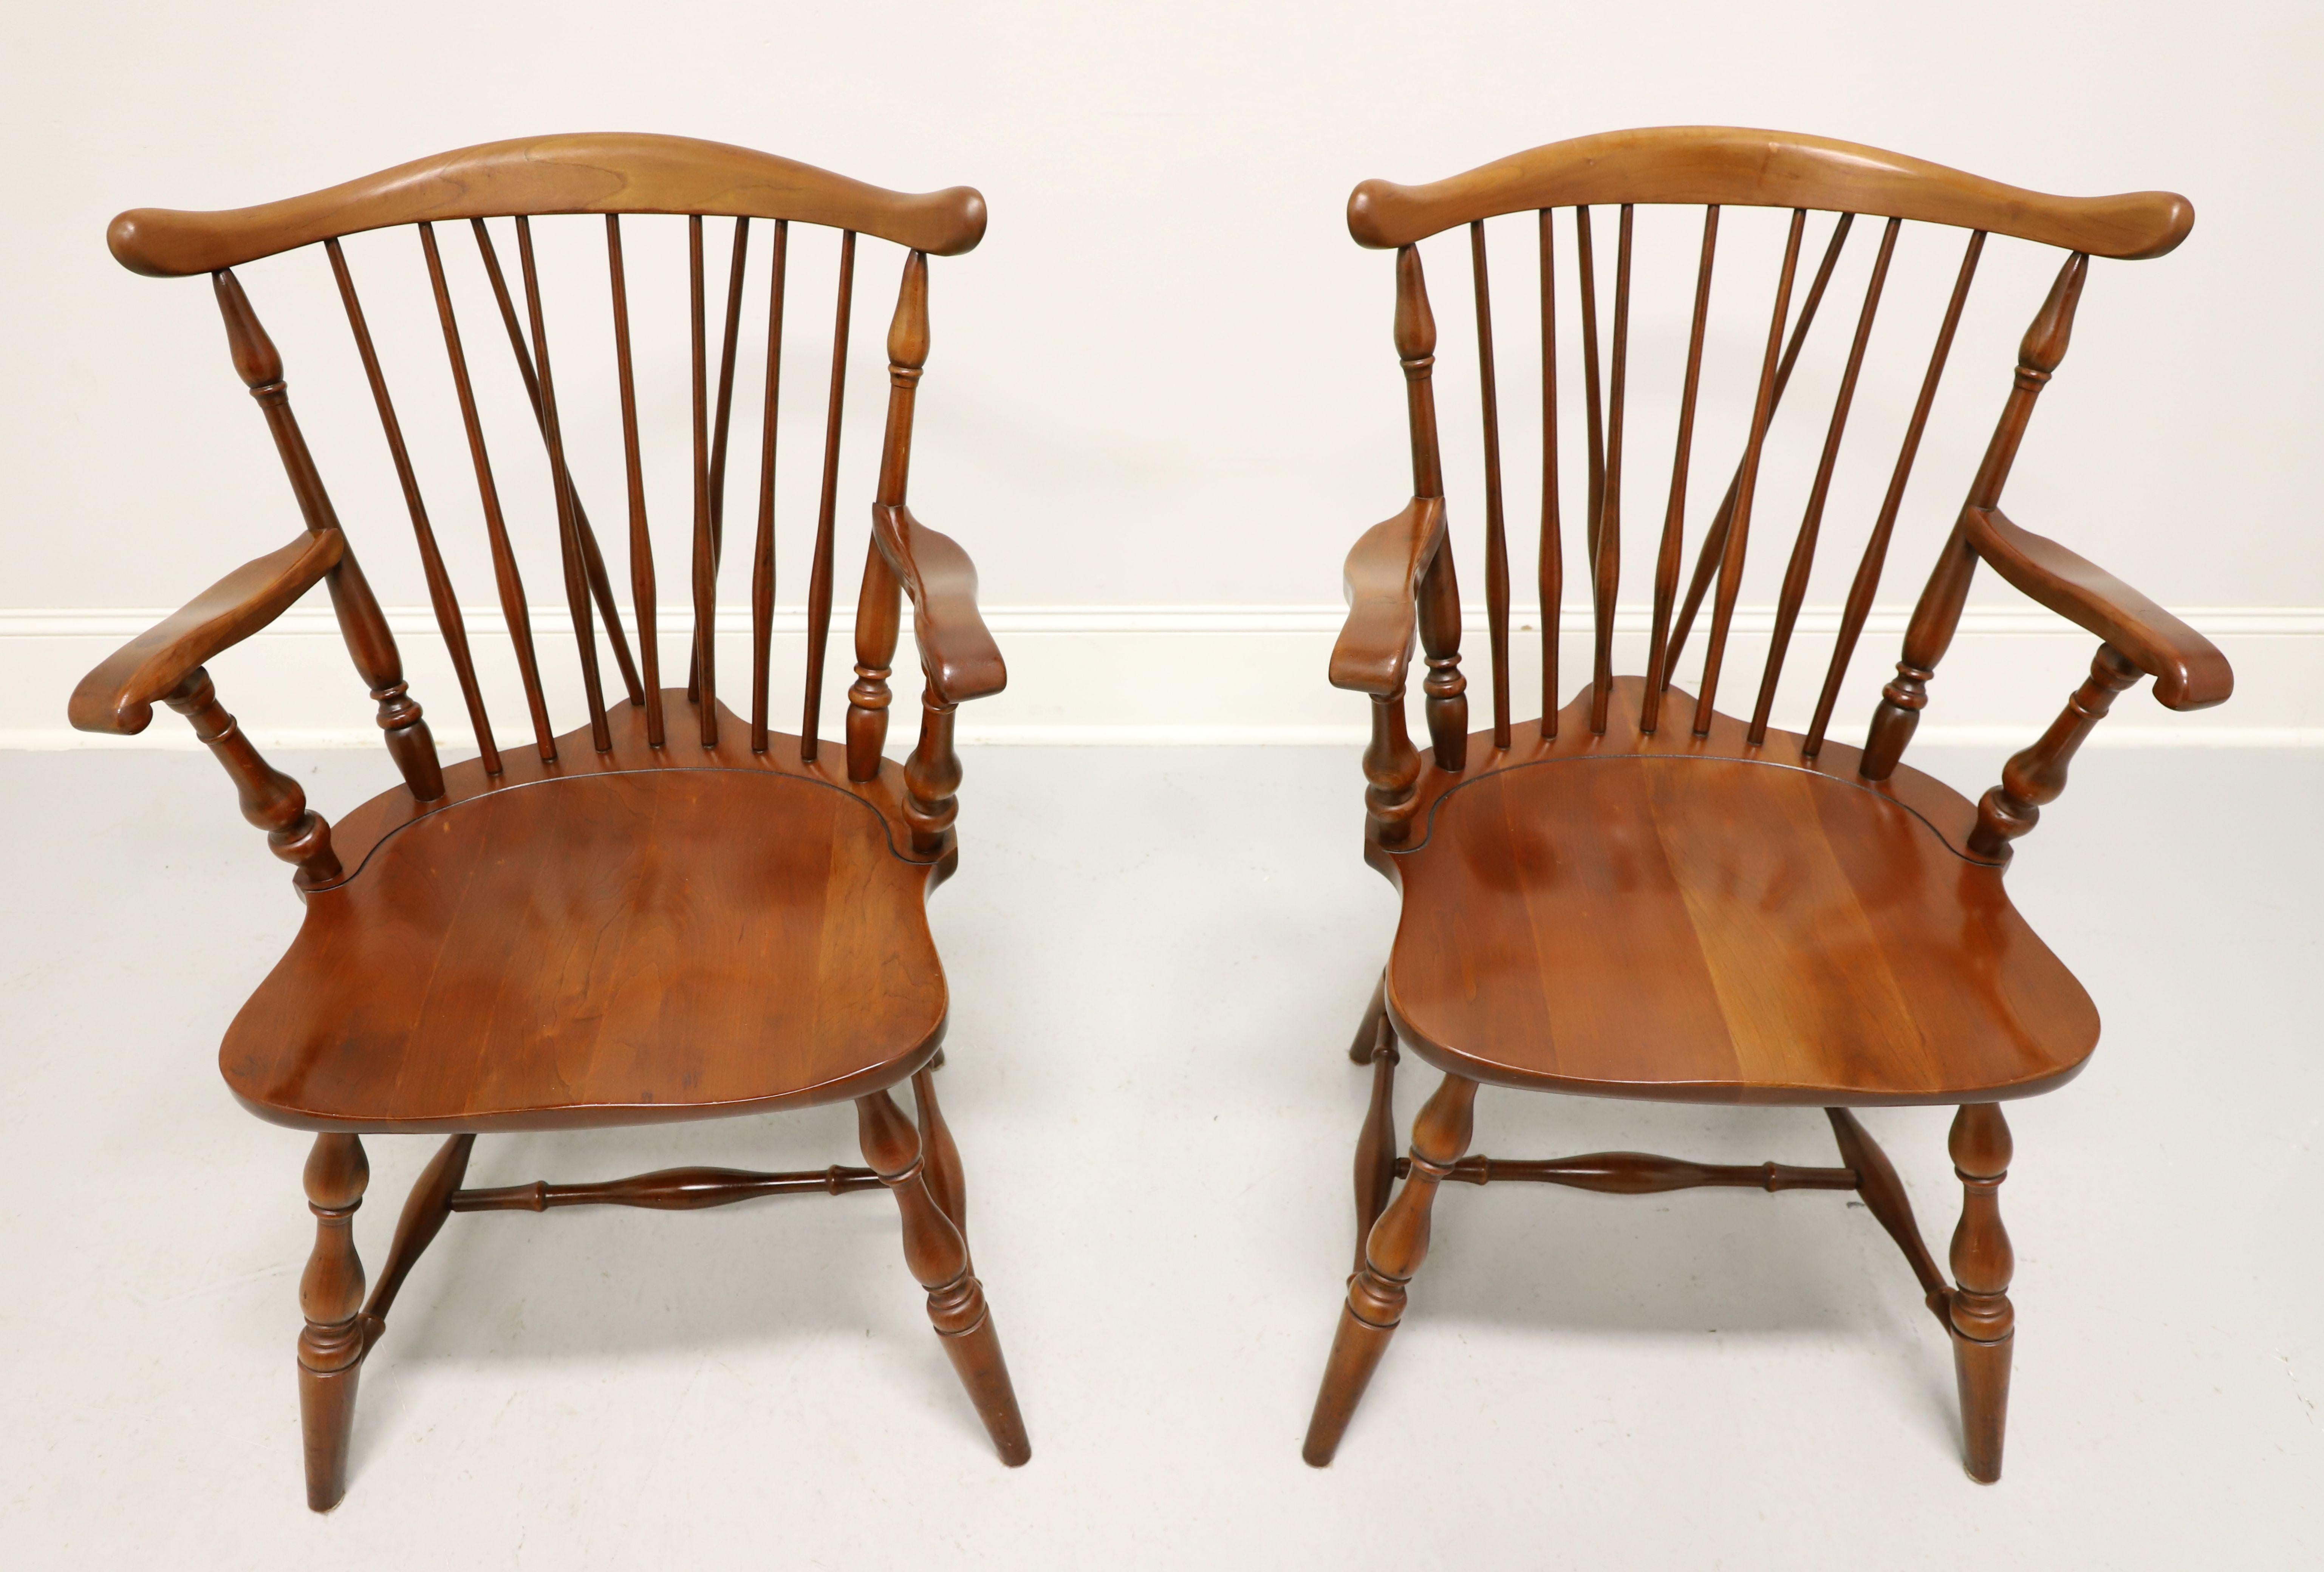 A pair of Windsor style dining armchairs by Pennsylvania House. Solid cherry wood, fiddleback with turned side spindles, gently curved arms with turned spindle supports, saddle shape seat, tail-supports with spindles, turned legs and stretchers.